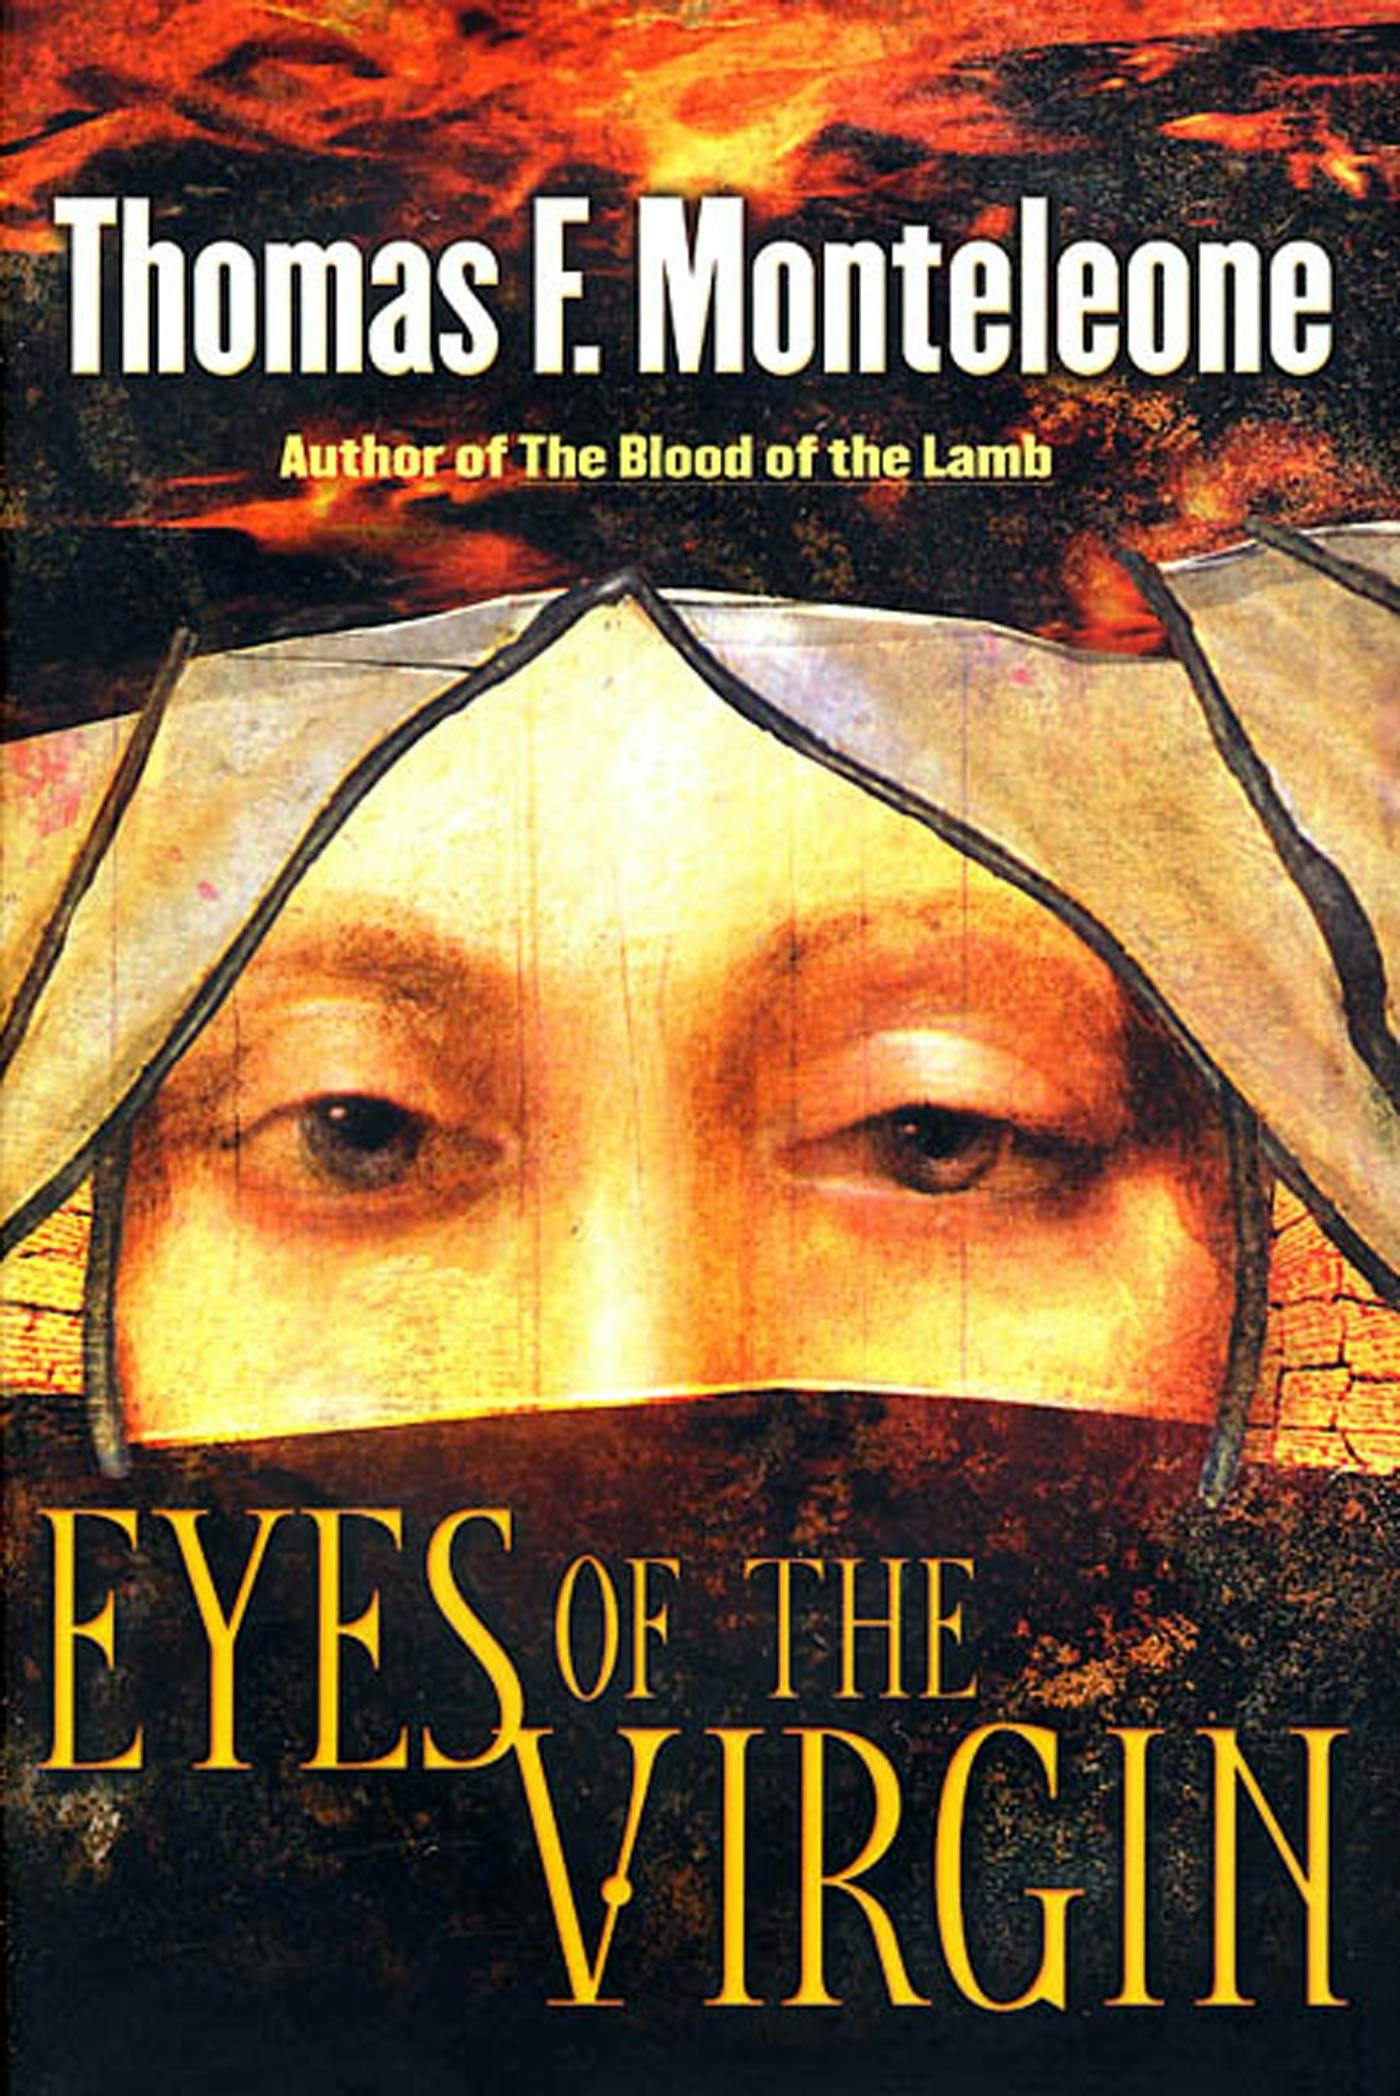 Cover for the book titled as: Eyes of the Virgin